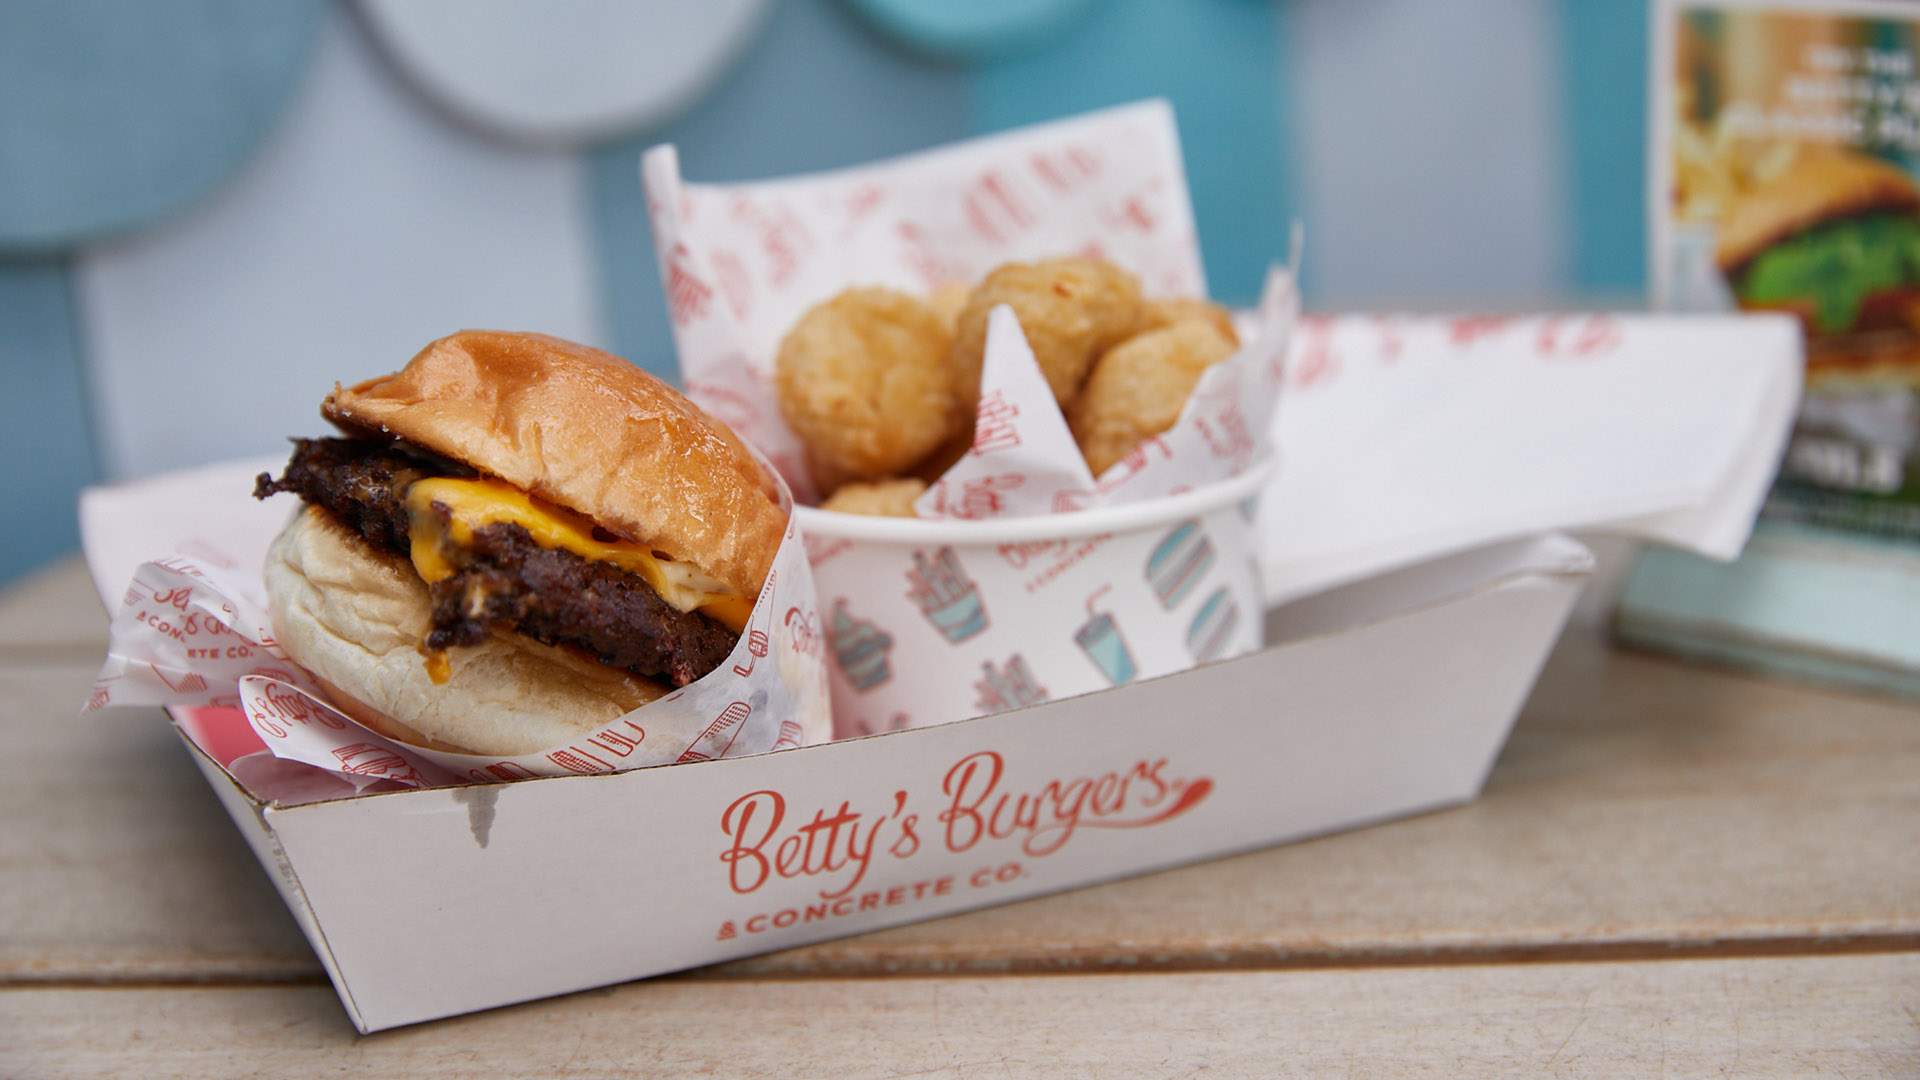 You Can Now Tuck Into Pre-Flight Snacks from Betty's Burgers in Virgin's East Coast Airport Lounges